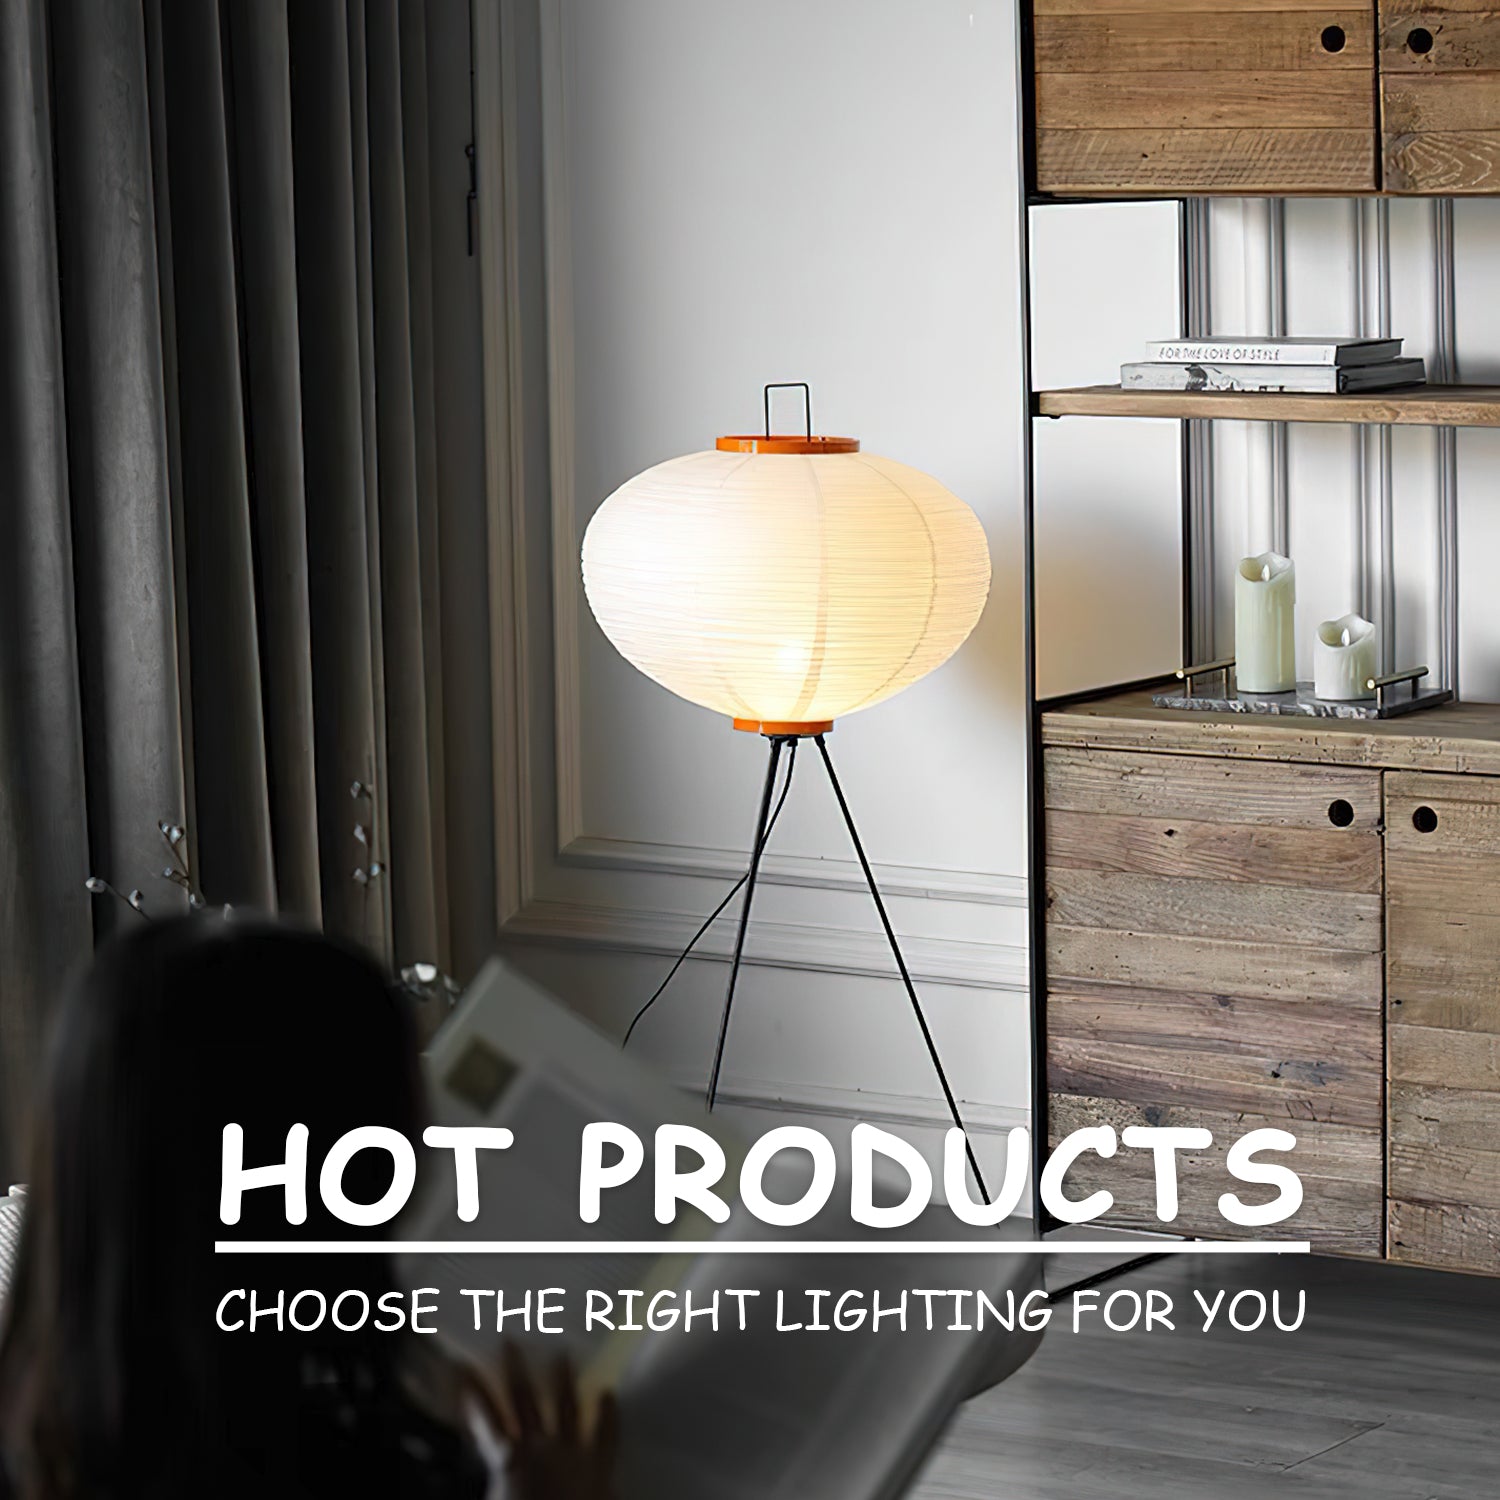 Choose the right lighting fixture for you: Top 9 Best-Selling Lamps at RayonShine！